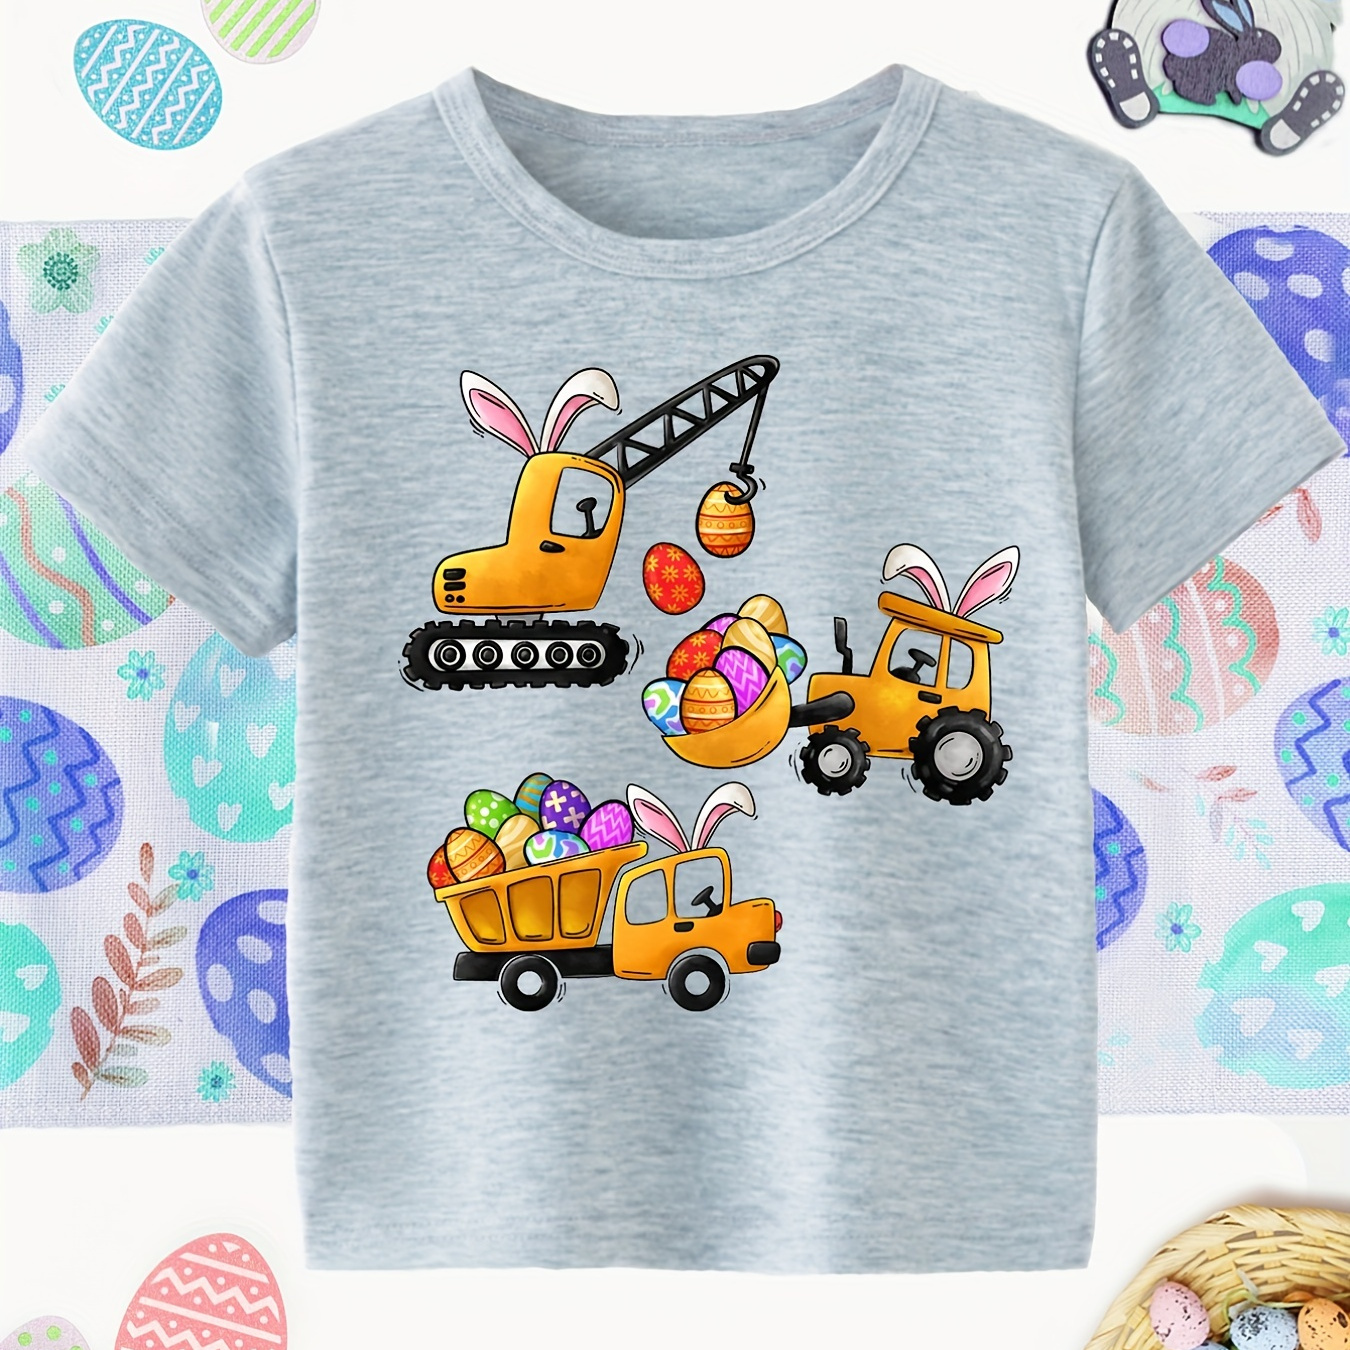 

Boys Easter 3 Cars Carry Easter Eggs T-shirt Tee Top Short Sleeves Crew Neck Summer Casual Kids Clothes